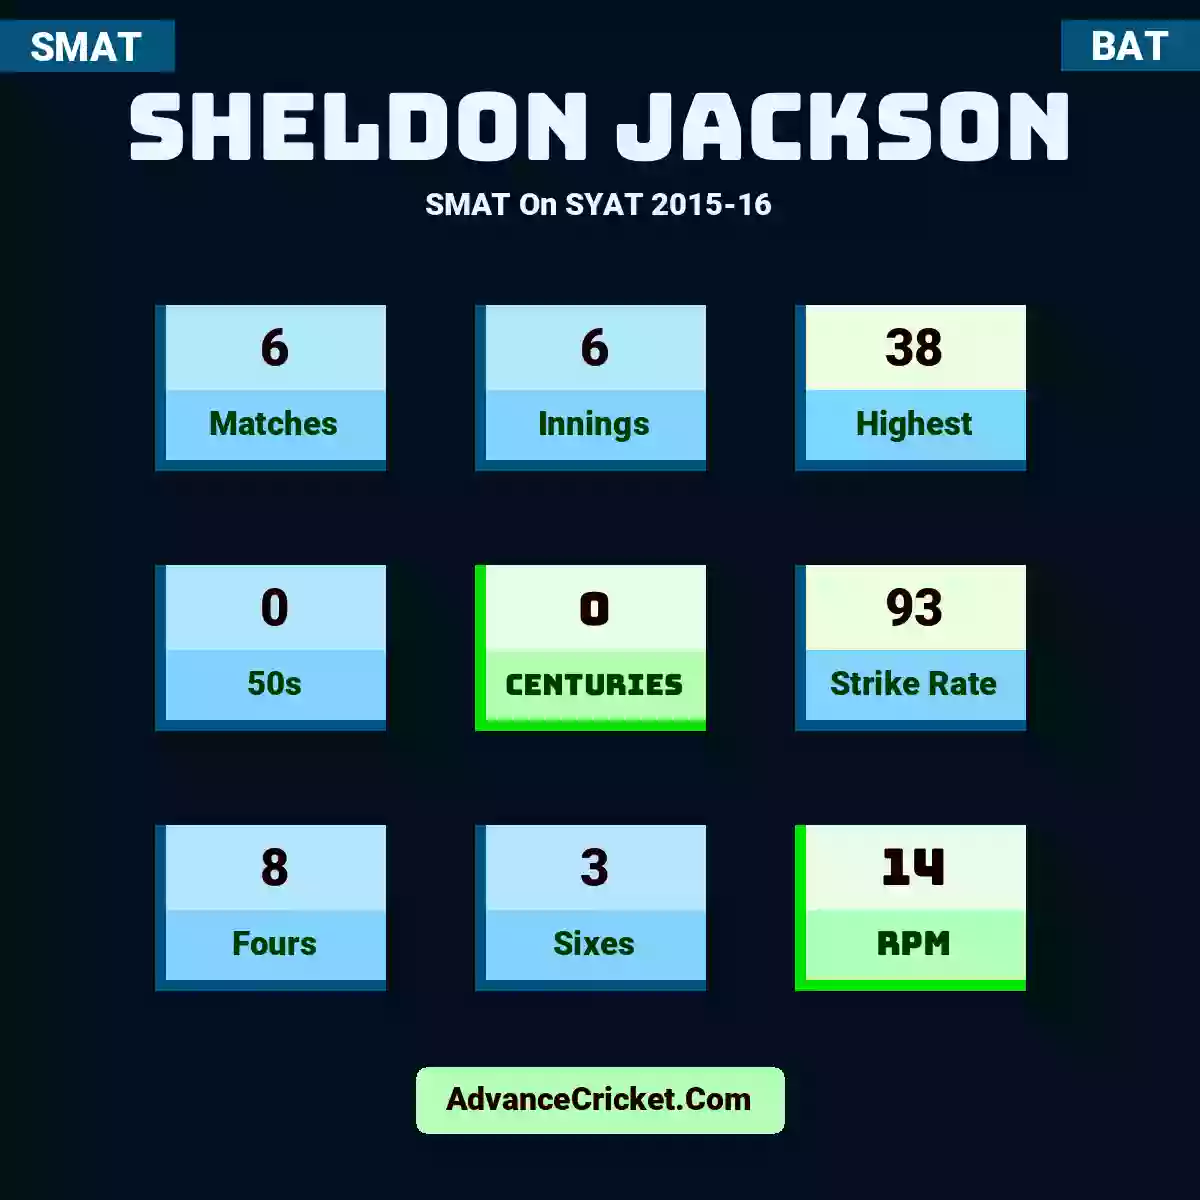 Sheldon Jackson SMAT  On SYAT 2015-16, Sheldon Jackson played 6 matches, scored 38 runs as highest, 0 half-centuries, and 0 centuries, with a strike rate of 93. S.Jackson hit 8 fours and 3 sixes, with an RPM of 14.